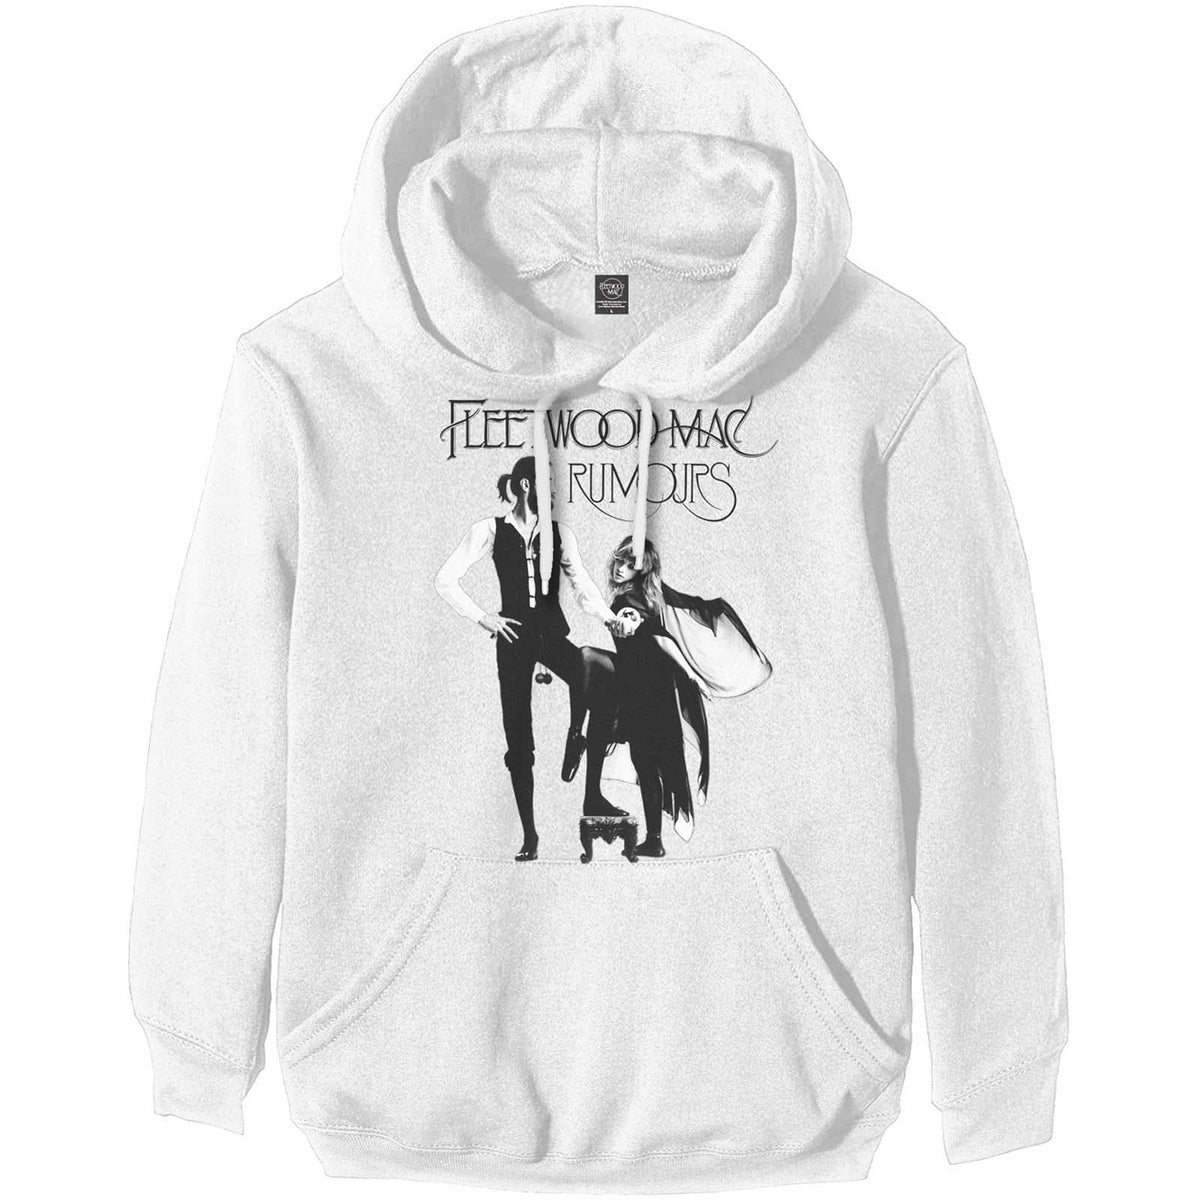 Fleetwood Mac Unisex Hoodie - Rumours - White Official Licensed Design - Worldwide Shipping - Jelly Frog